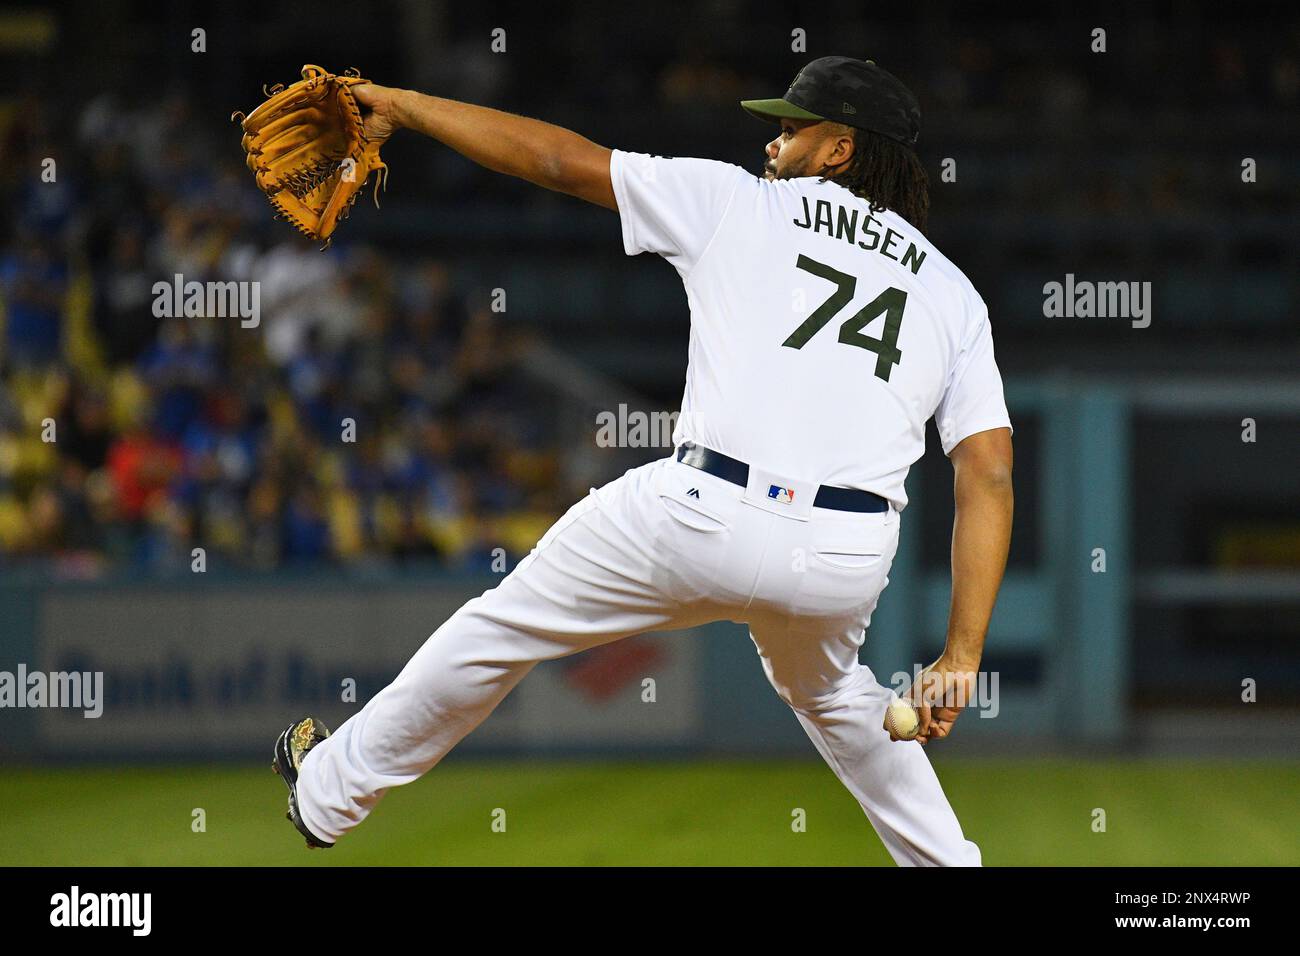 LOS ANGELES, CA - MAY 28: Los Angeles Dodgers Pitcher Kenley